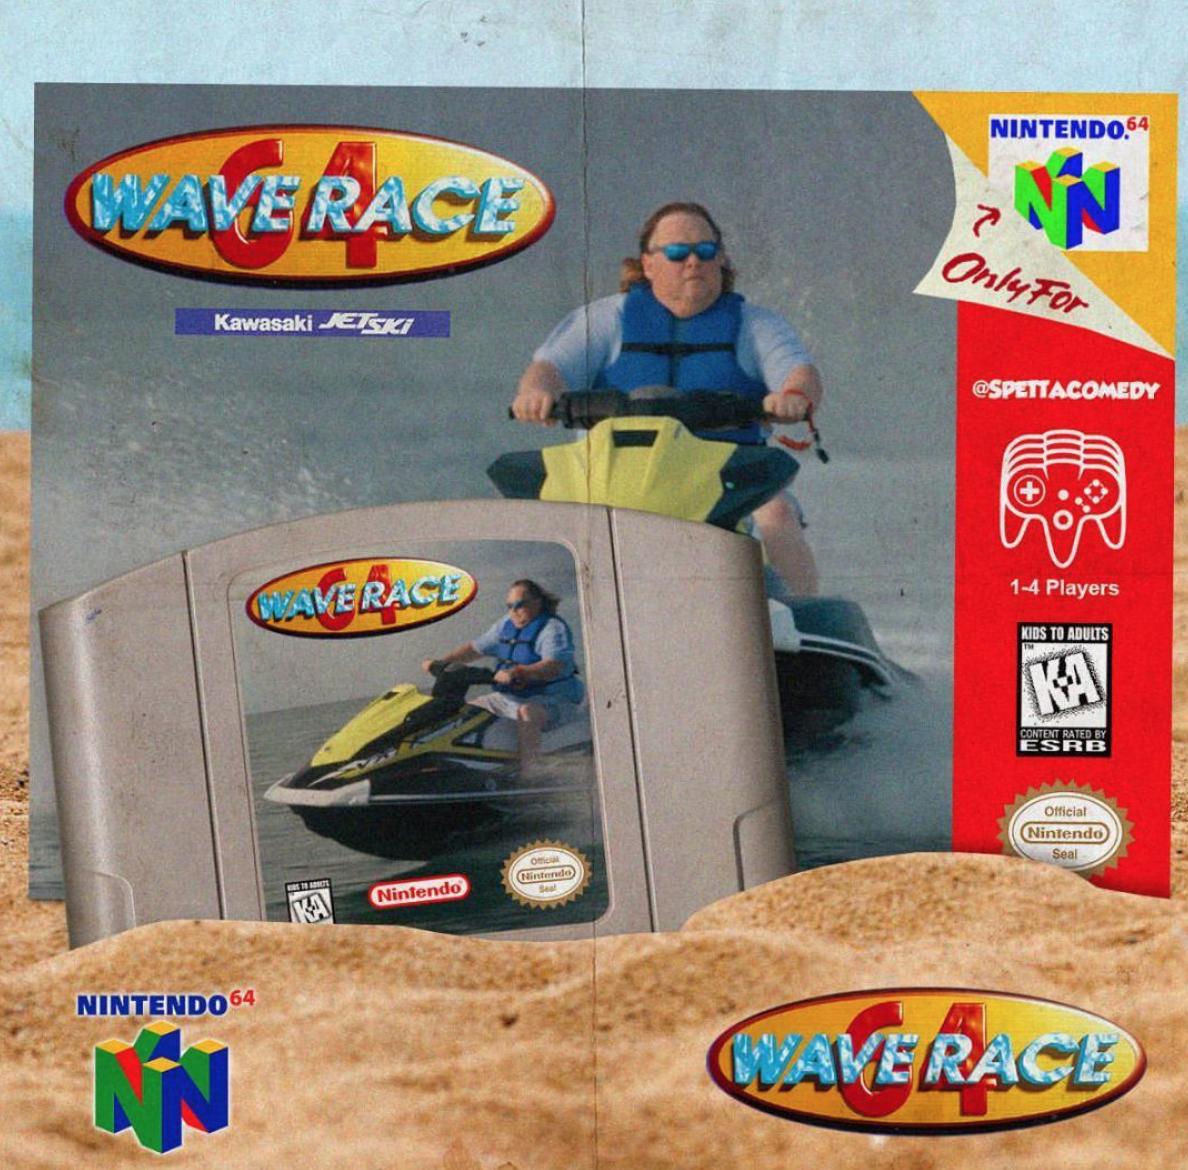 tiger king - Nintendo 64 - Nintendo Camerace W Only For Kawasaki Ekt Spettacomedy Average 14 Players A Cindende Nintendo In Quave Race